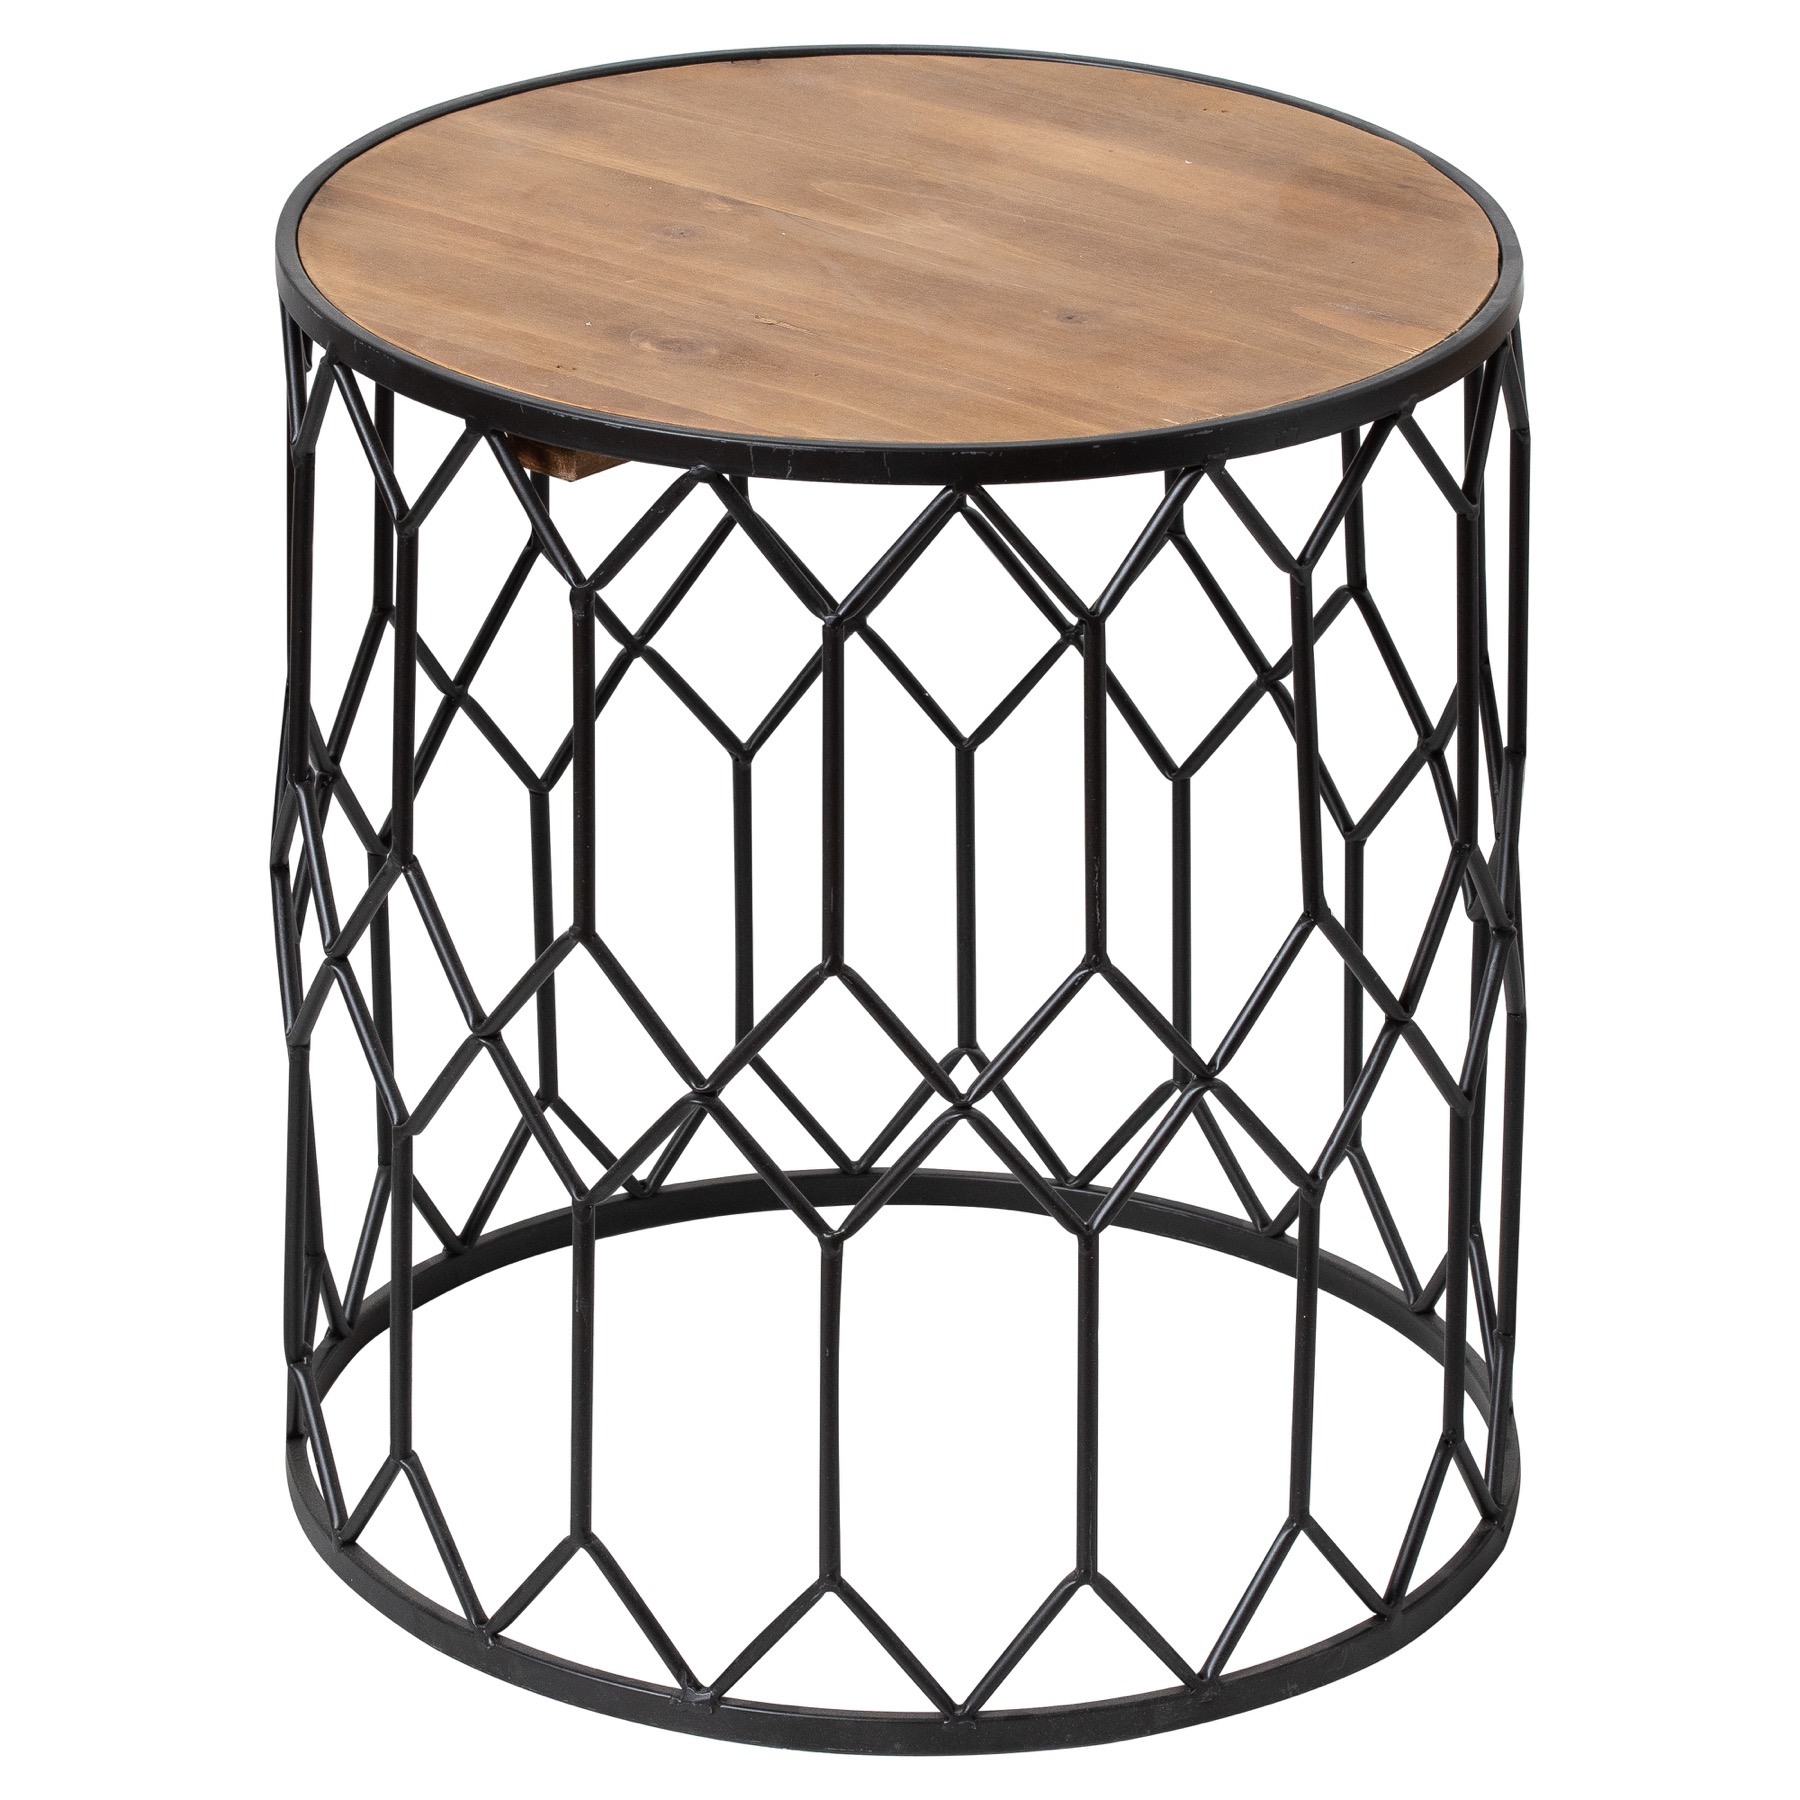 Set Of Three Honeycomb Side Tables - Image 3